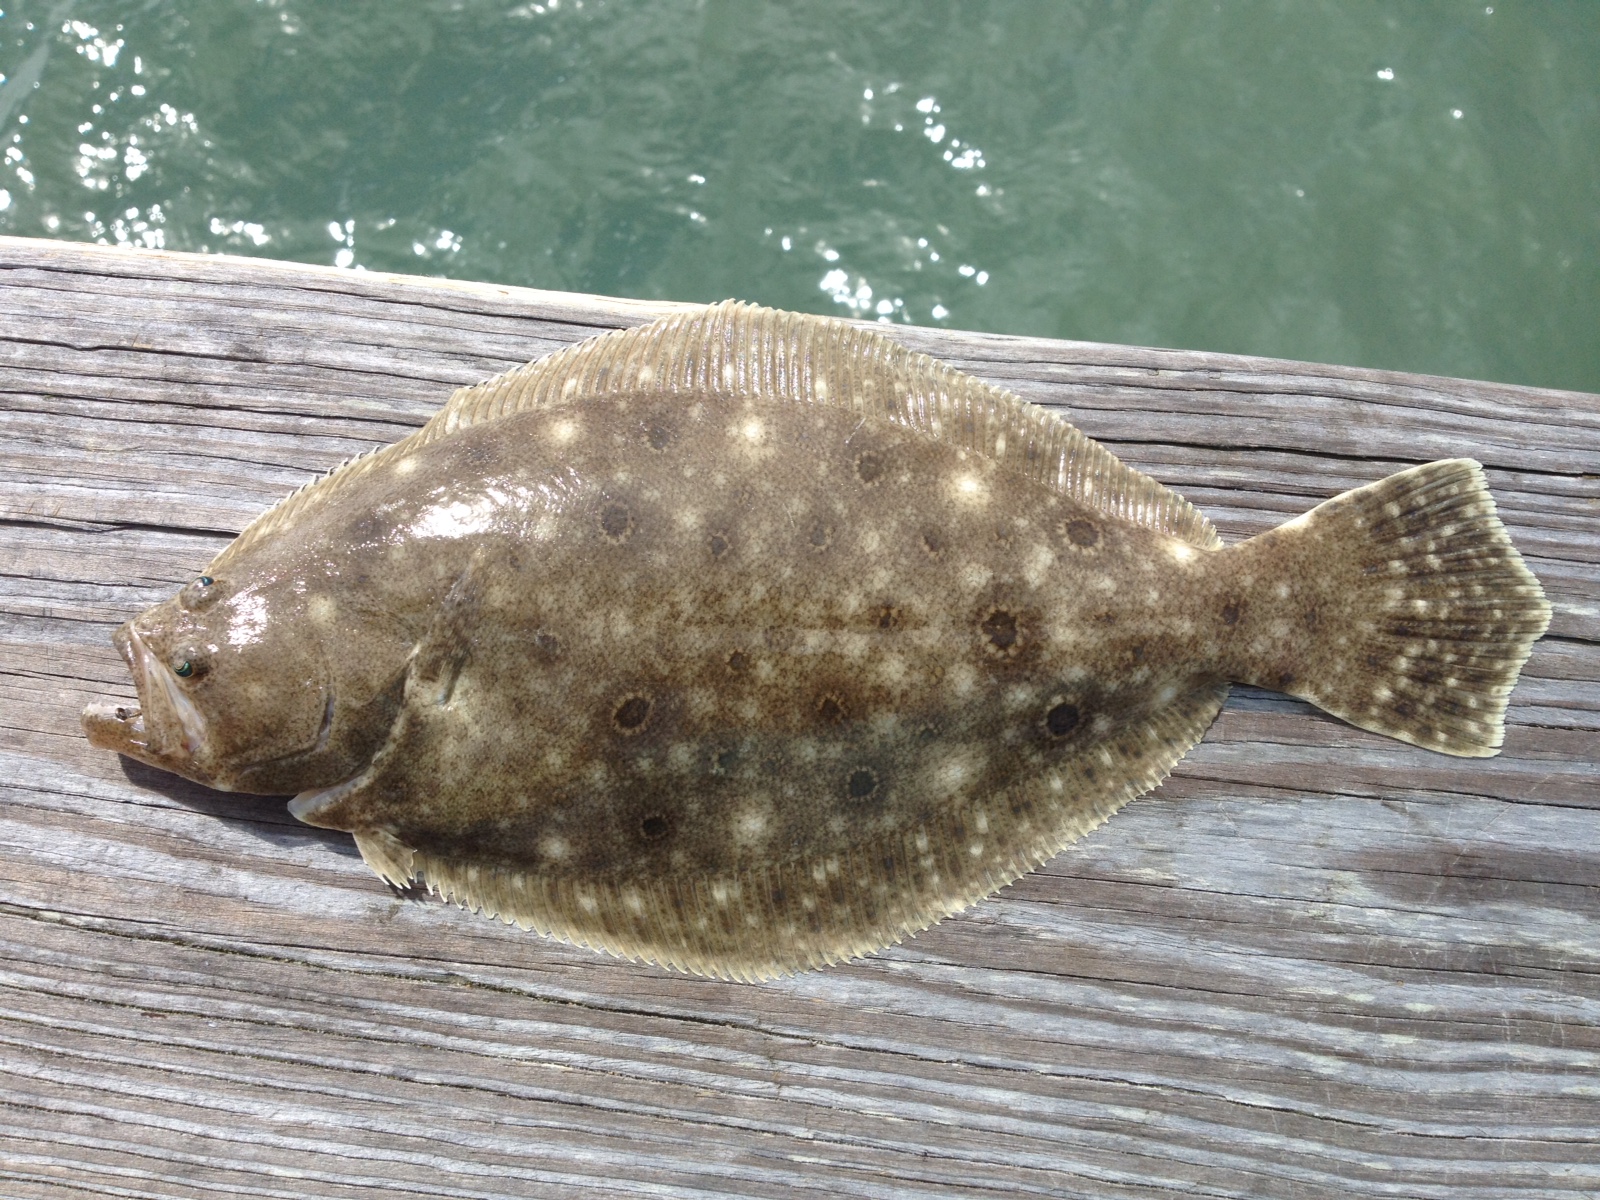 Recreational flounder season in N.C. opens Thursday; Anglers encouraged to donate carcasses to science